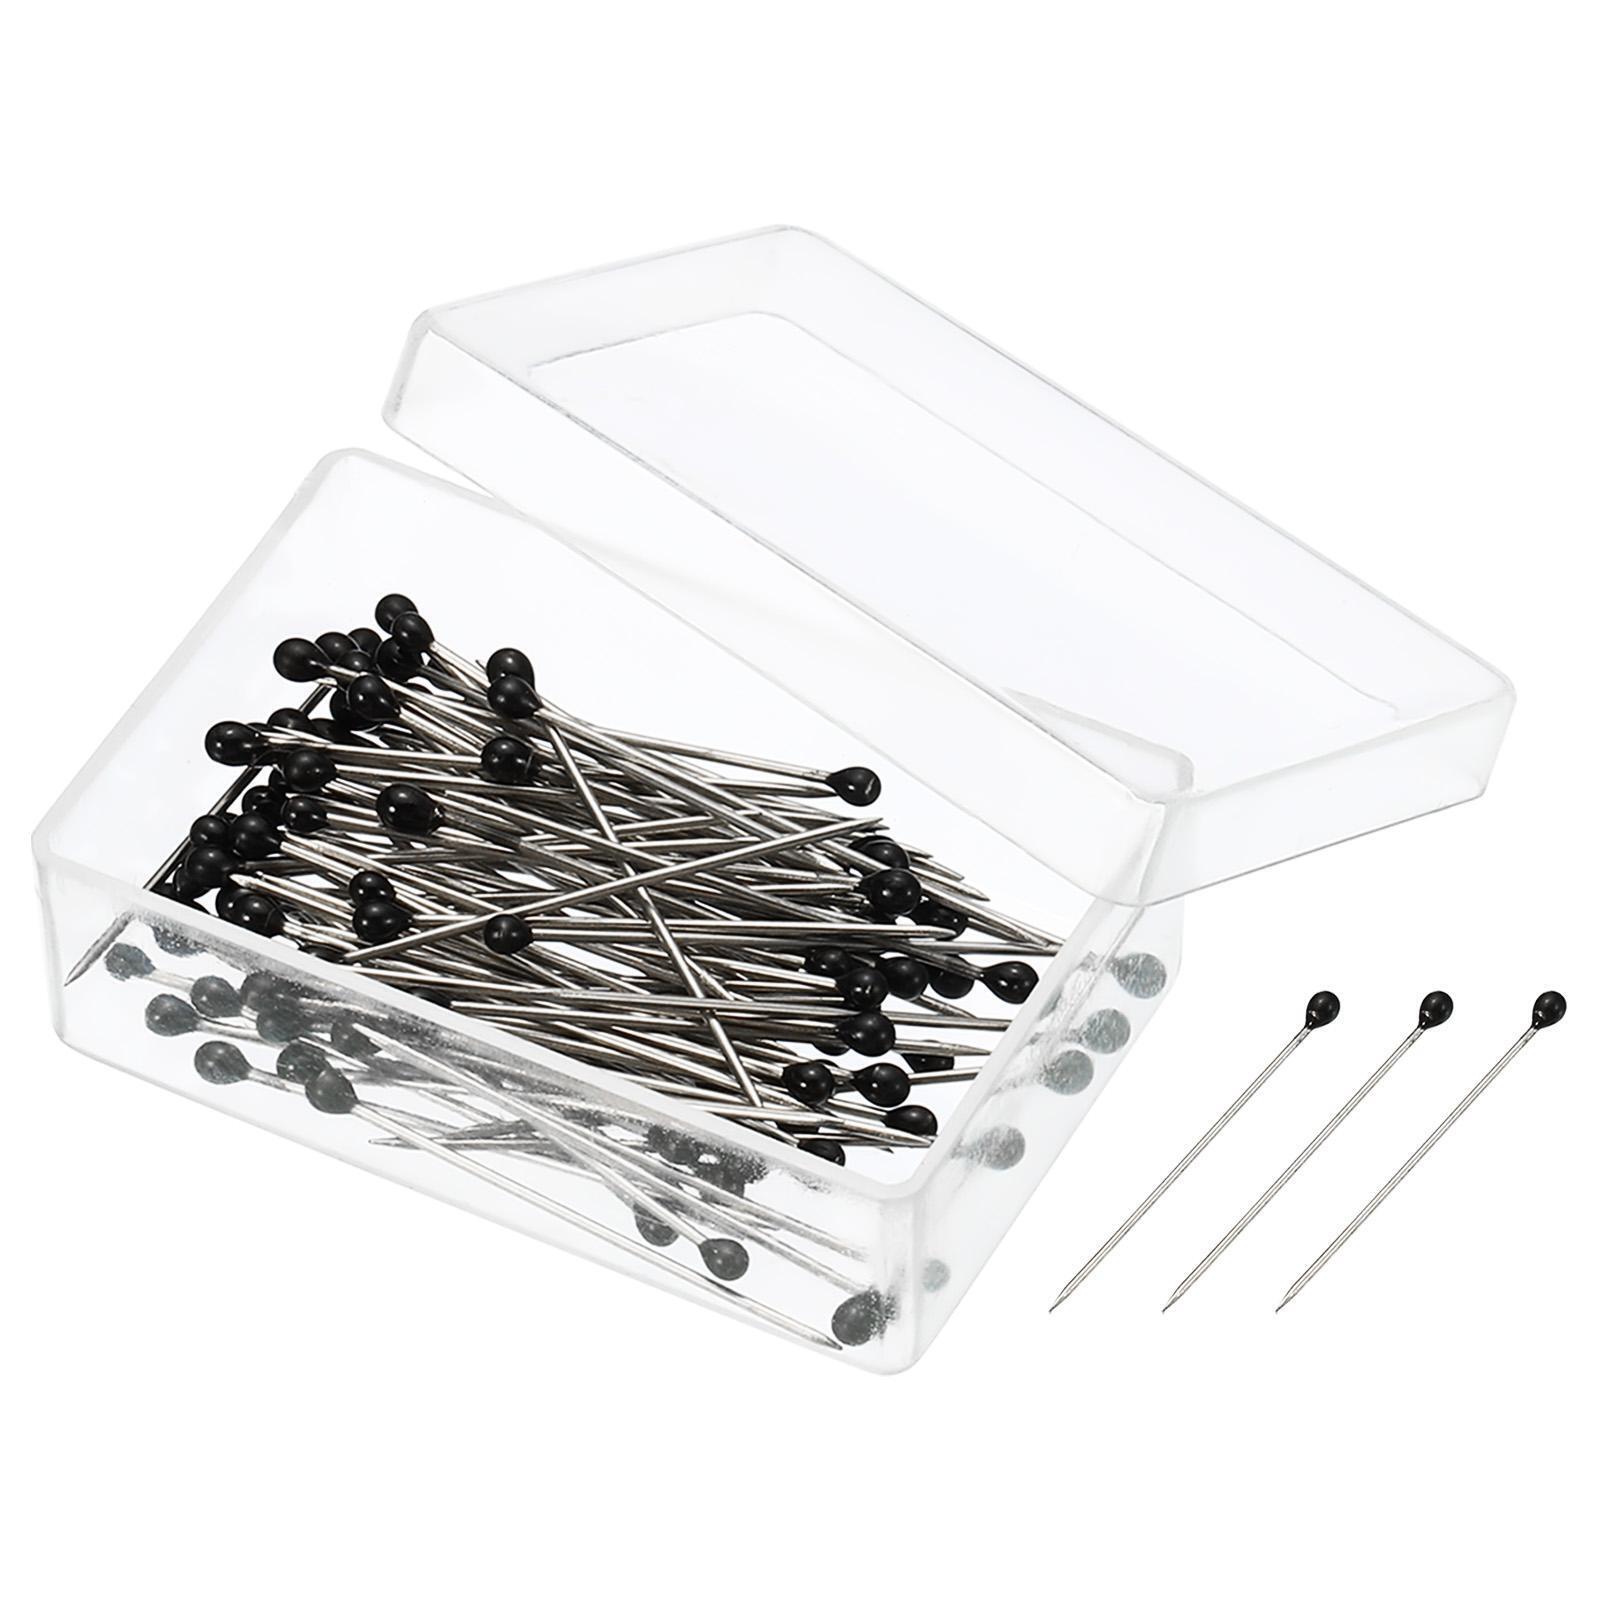 5 Set Sewing Pins, Decorative Quilting Straight Pin For Diy Decorations, Black